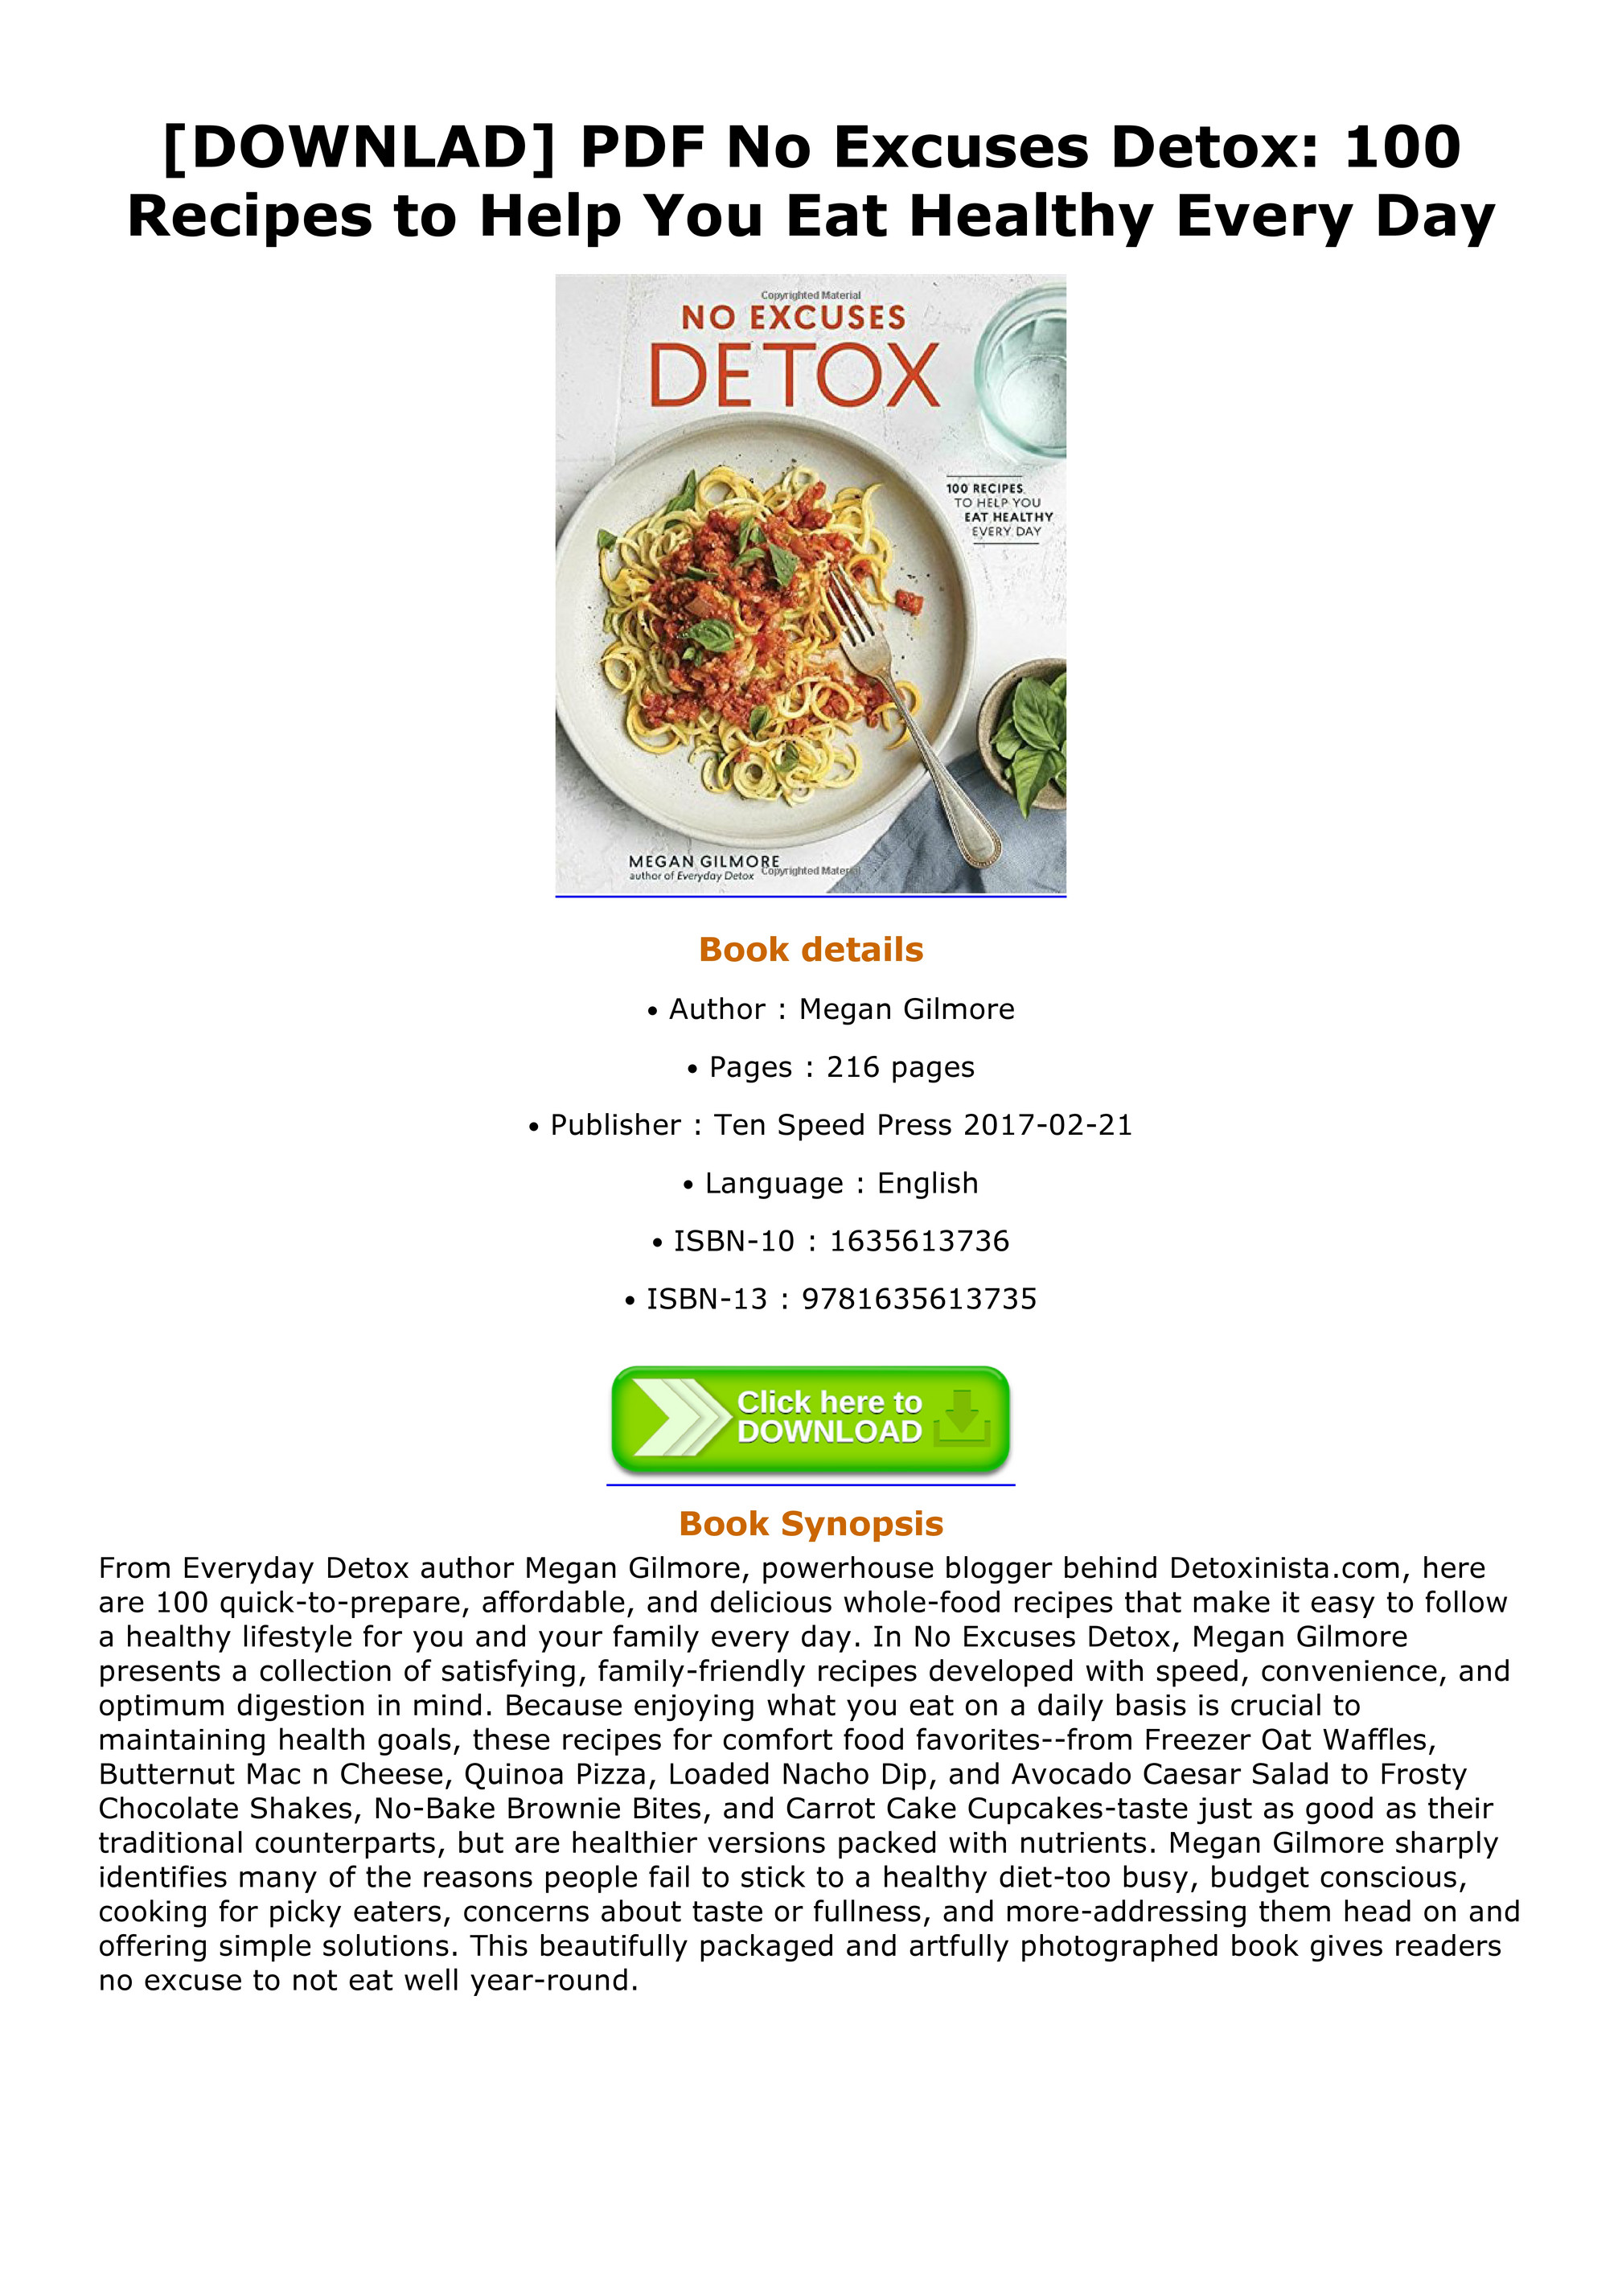 Deirdre Downlad Pdf No Excuses Detox 100 Recipes To Help You Eat Healthy Every Day Page 1 Created With Publitas Com